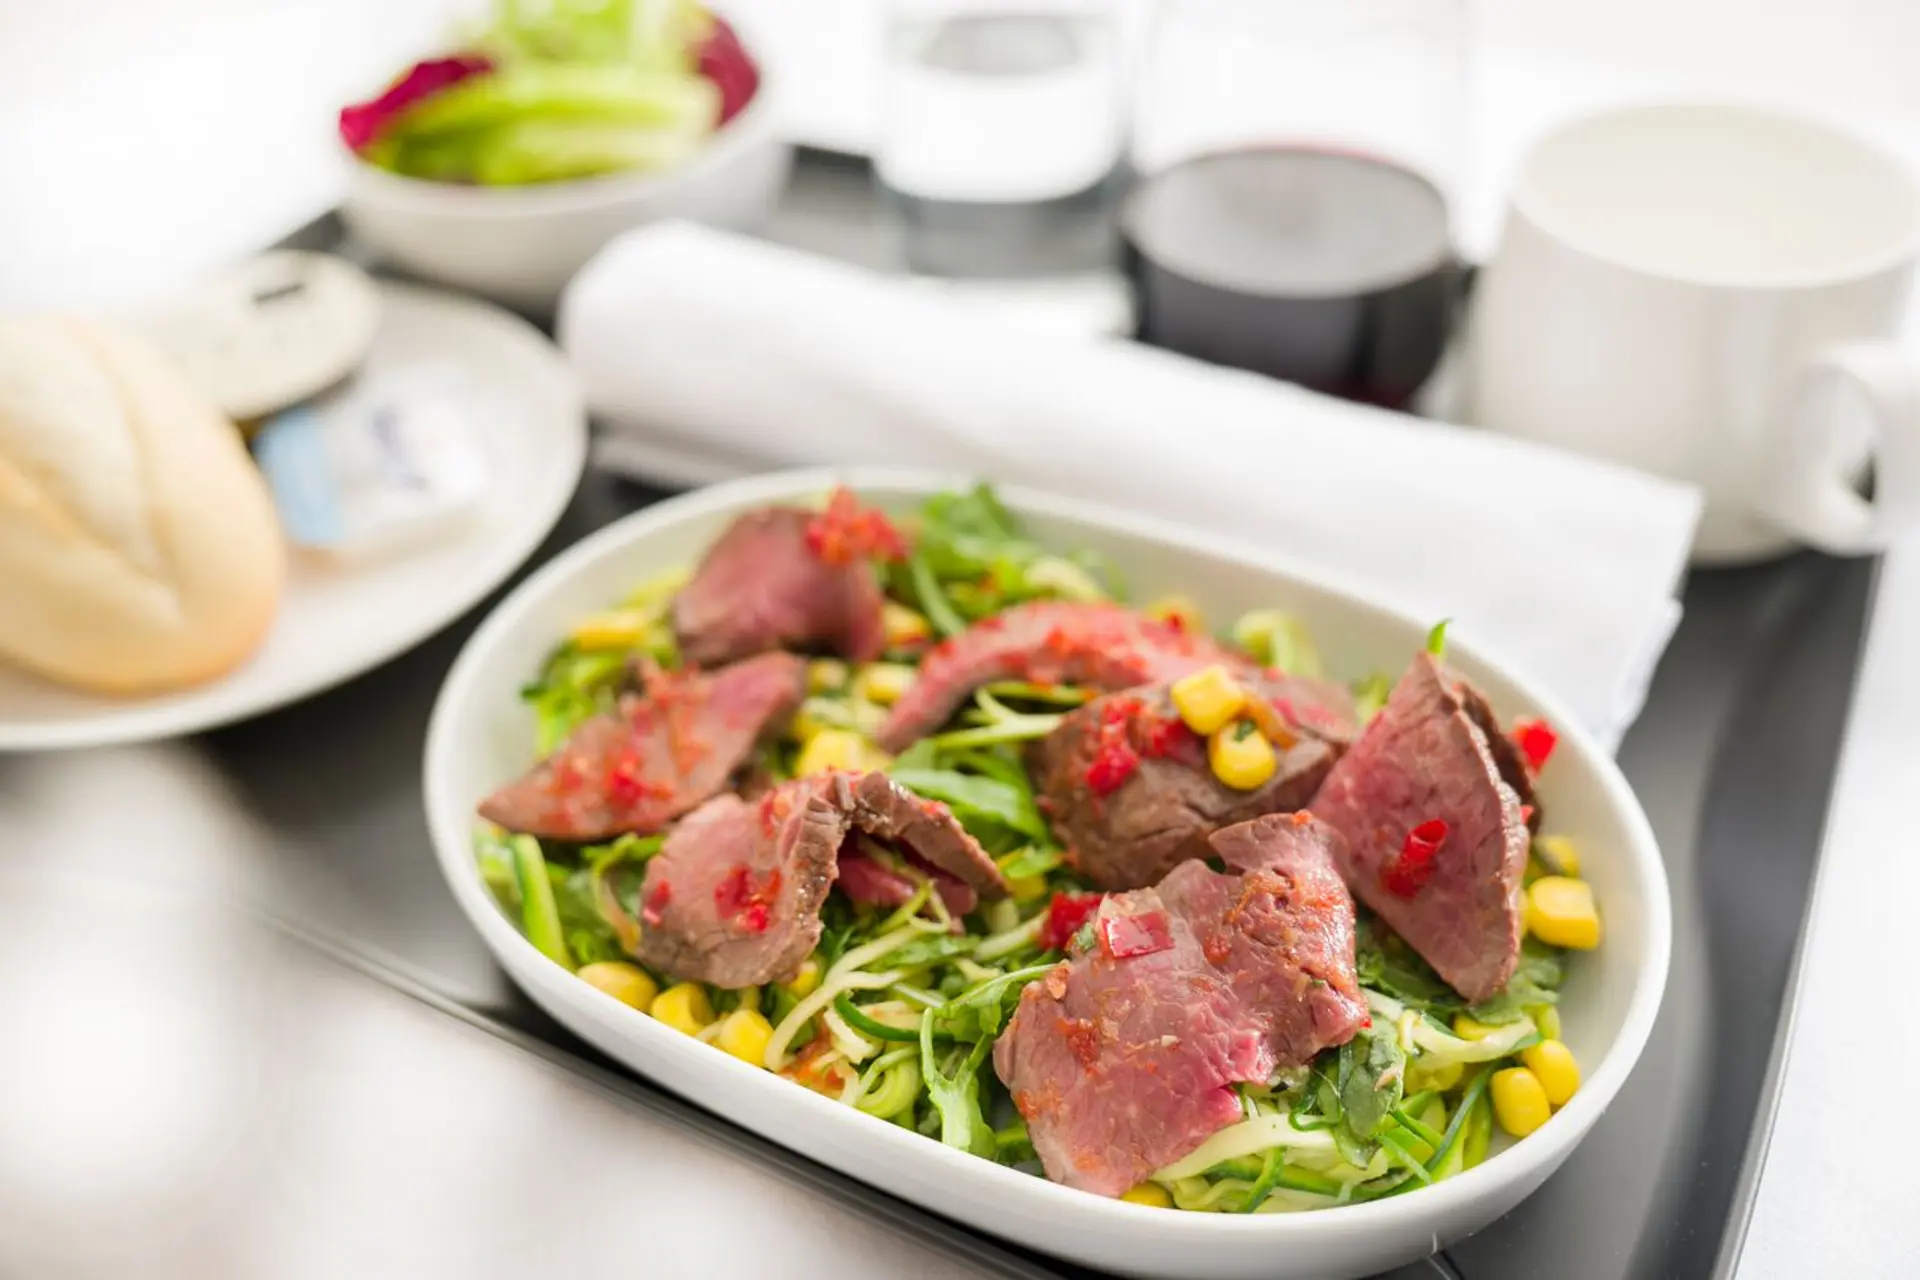 Salad-of-cumin-spiced-beef-with-zucchini-corn-and-a-citris-dressing-Economy-and-Premium-Economy-menu-ex-PERLHR-B787-QF9_prev.jpg